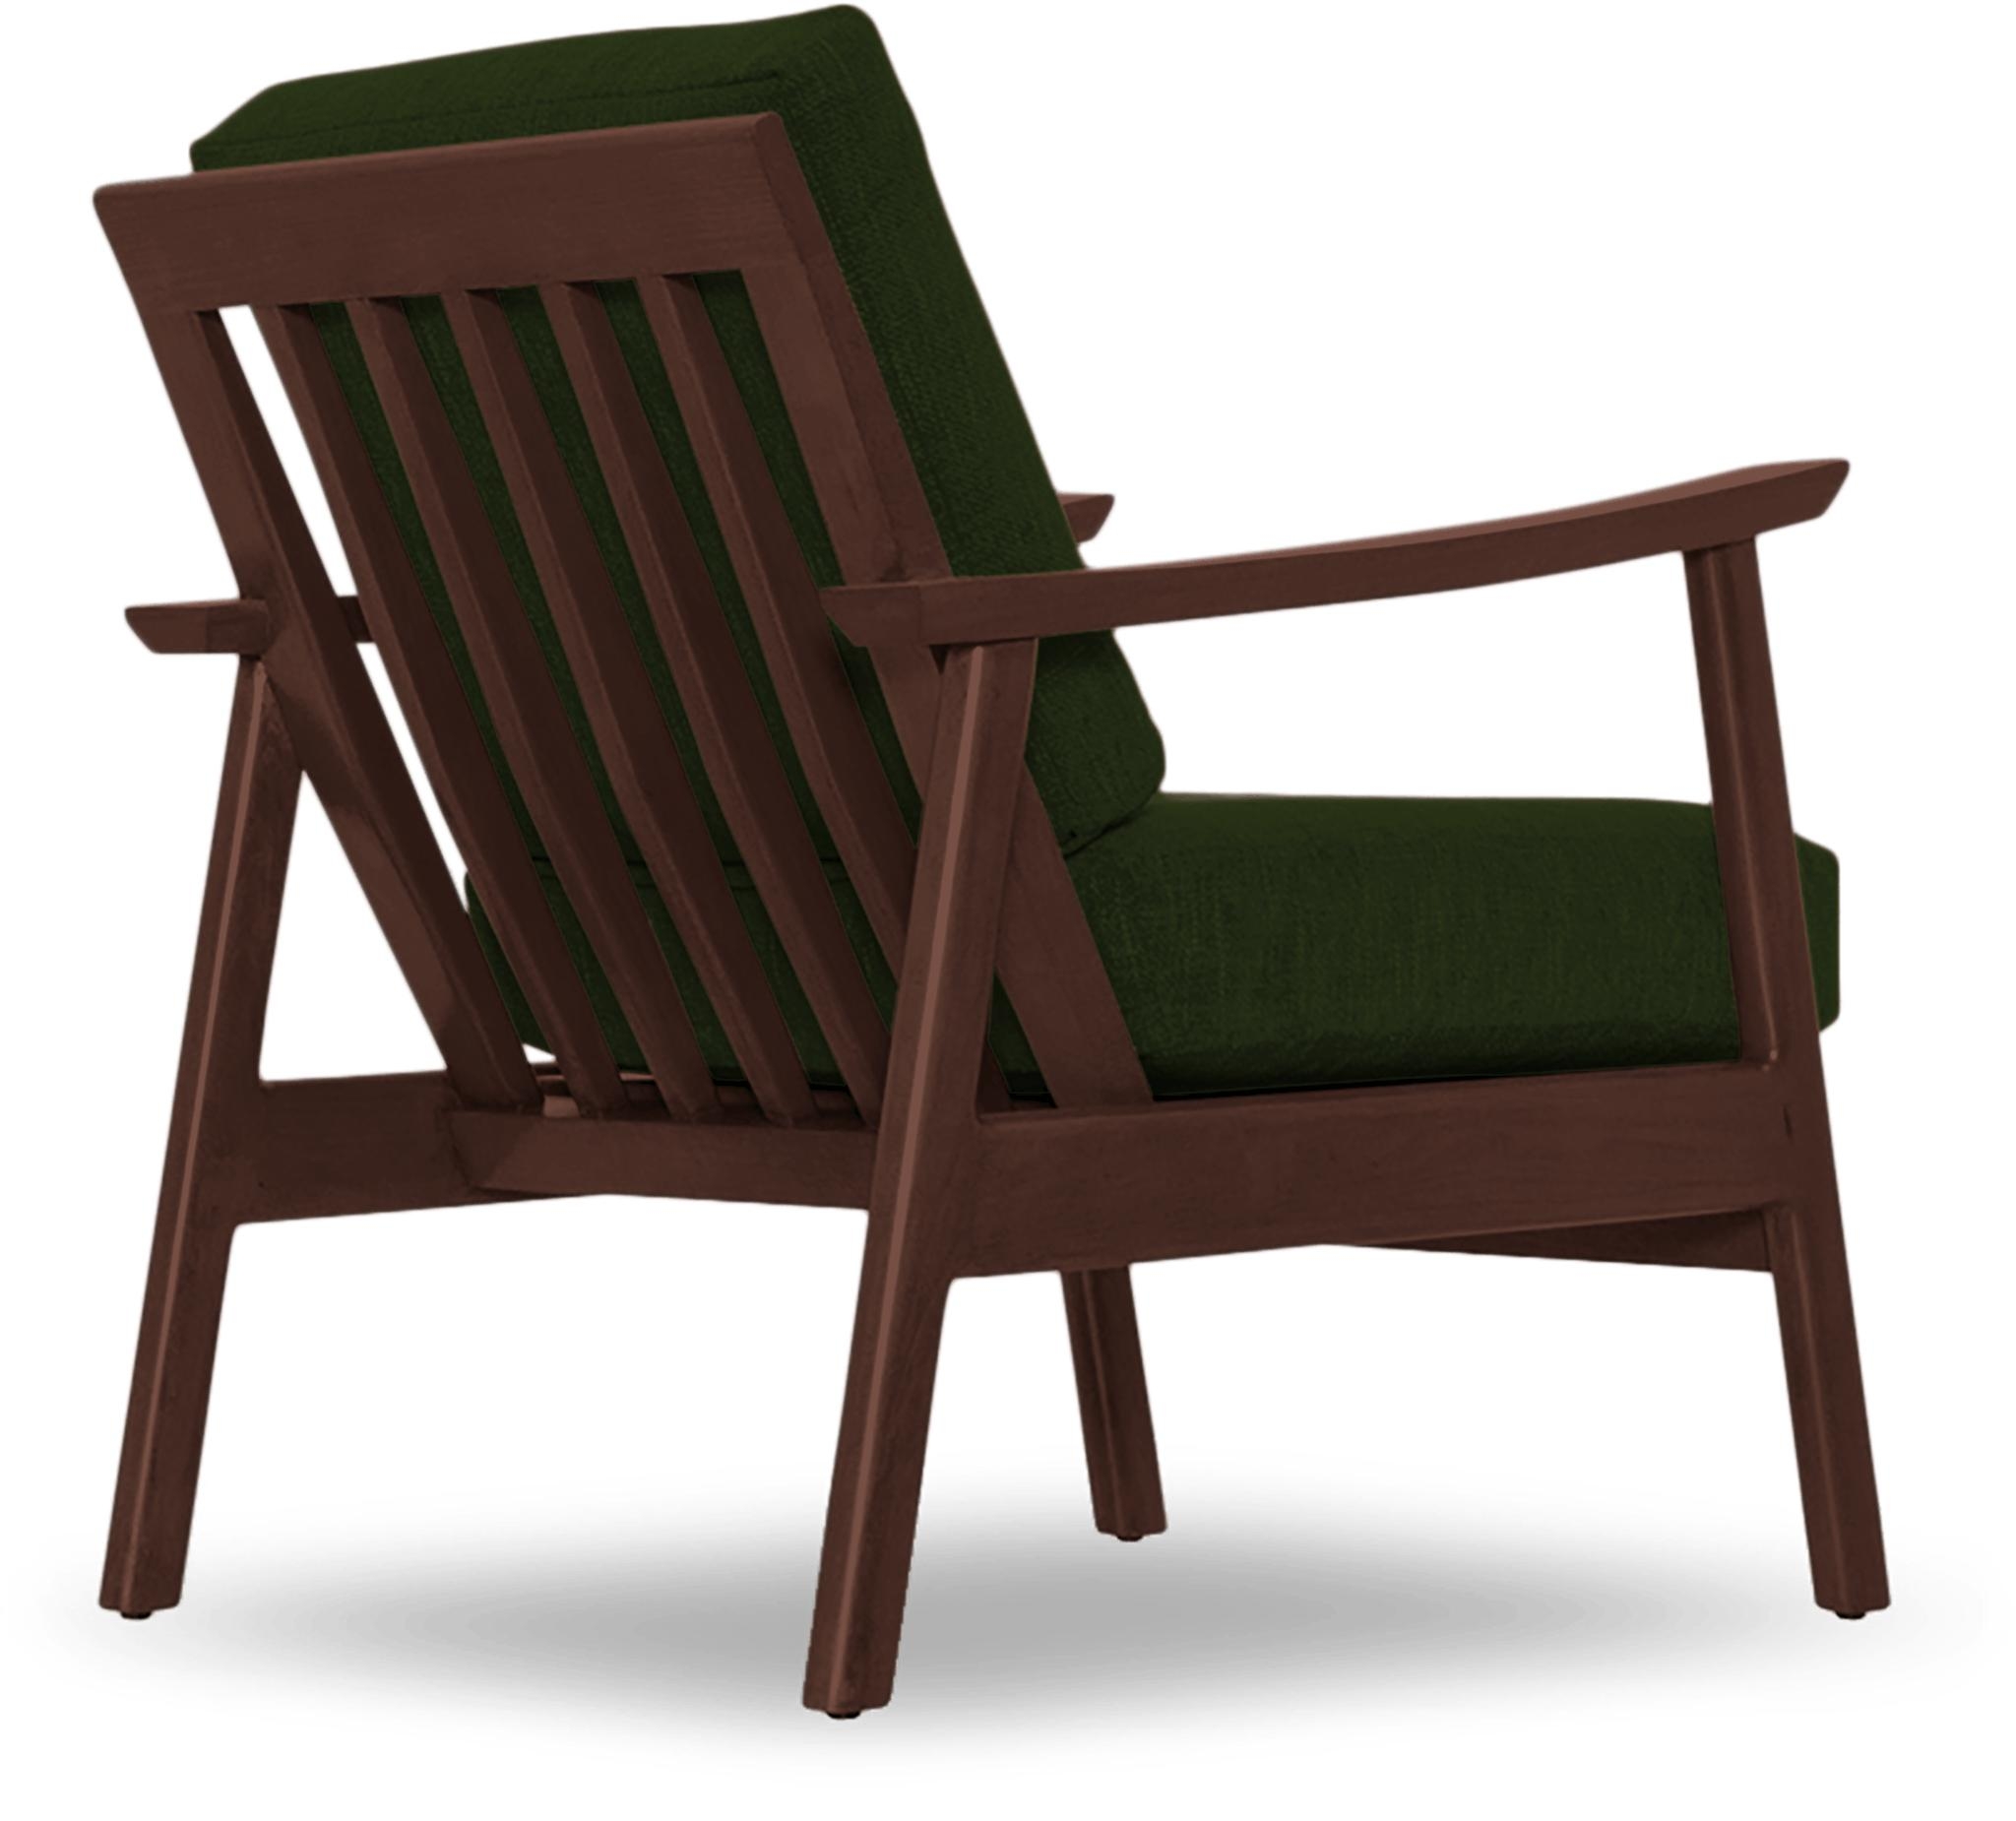 Green Paley Mid Century Modern Chair - Royale Forest - Walnut - Image 3